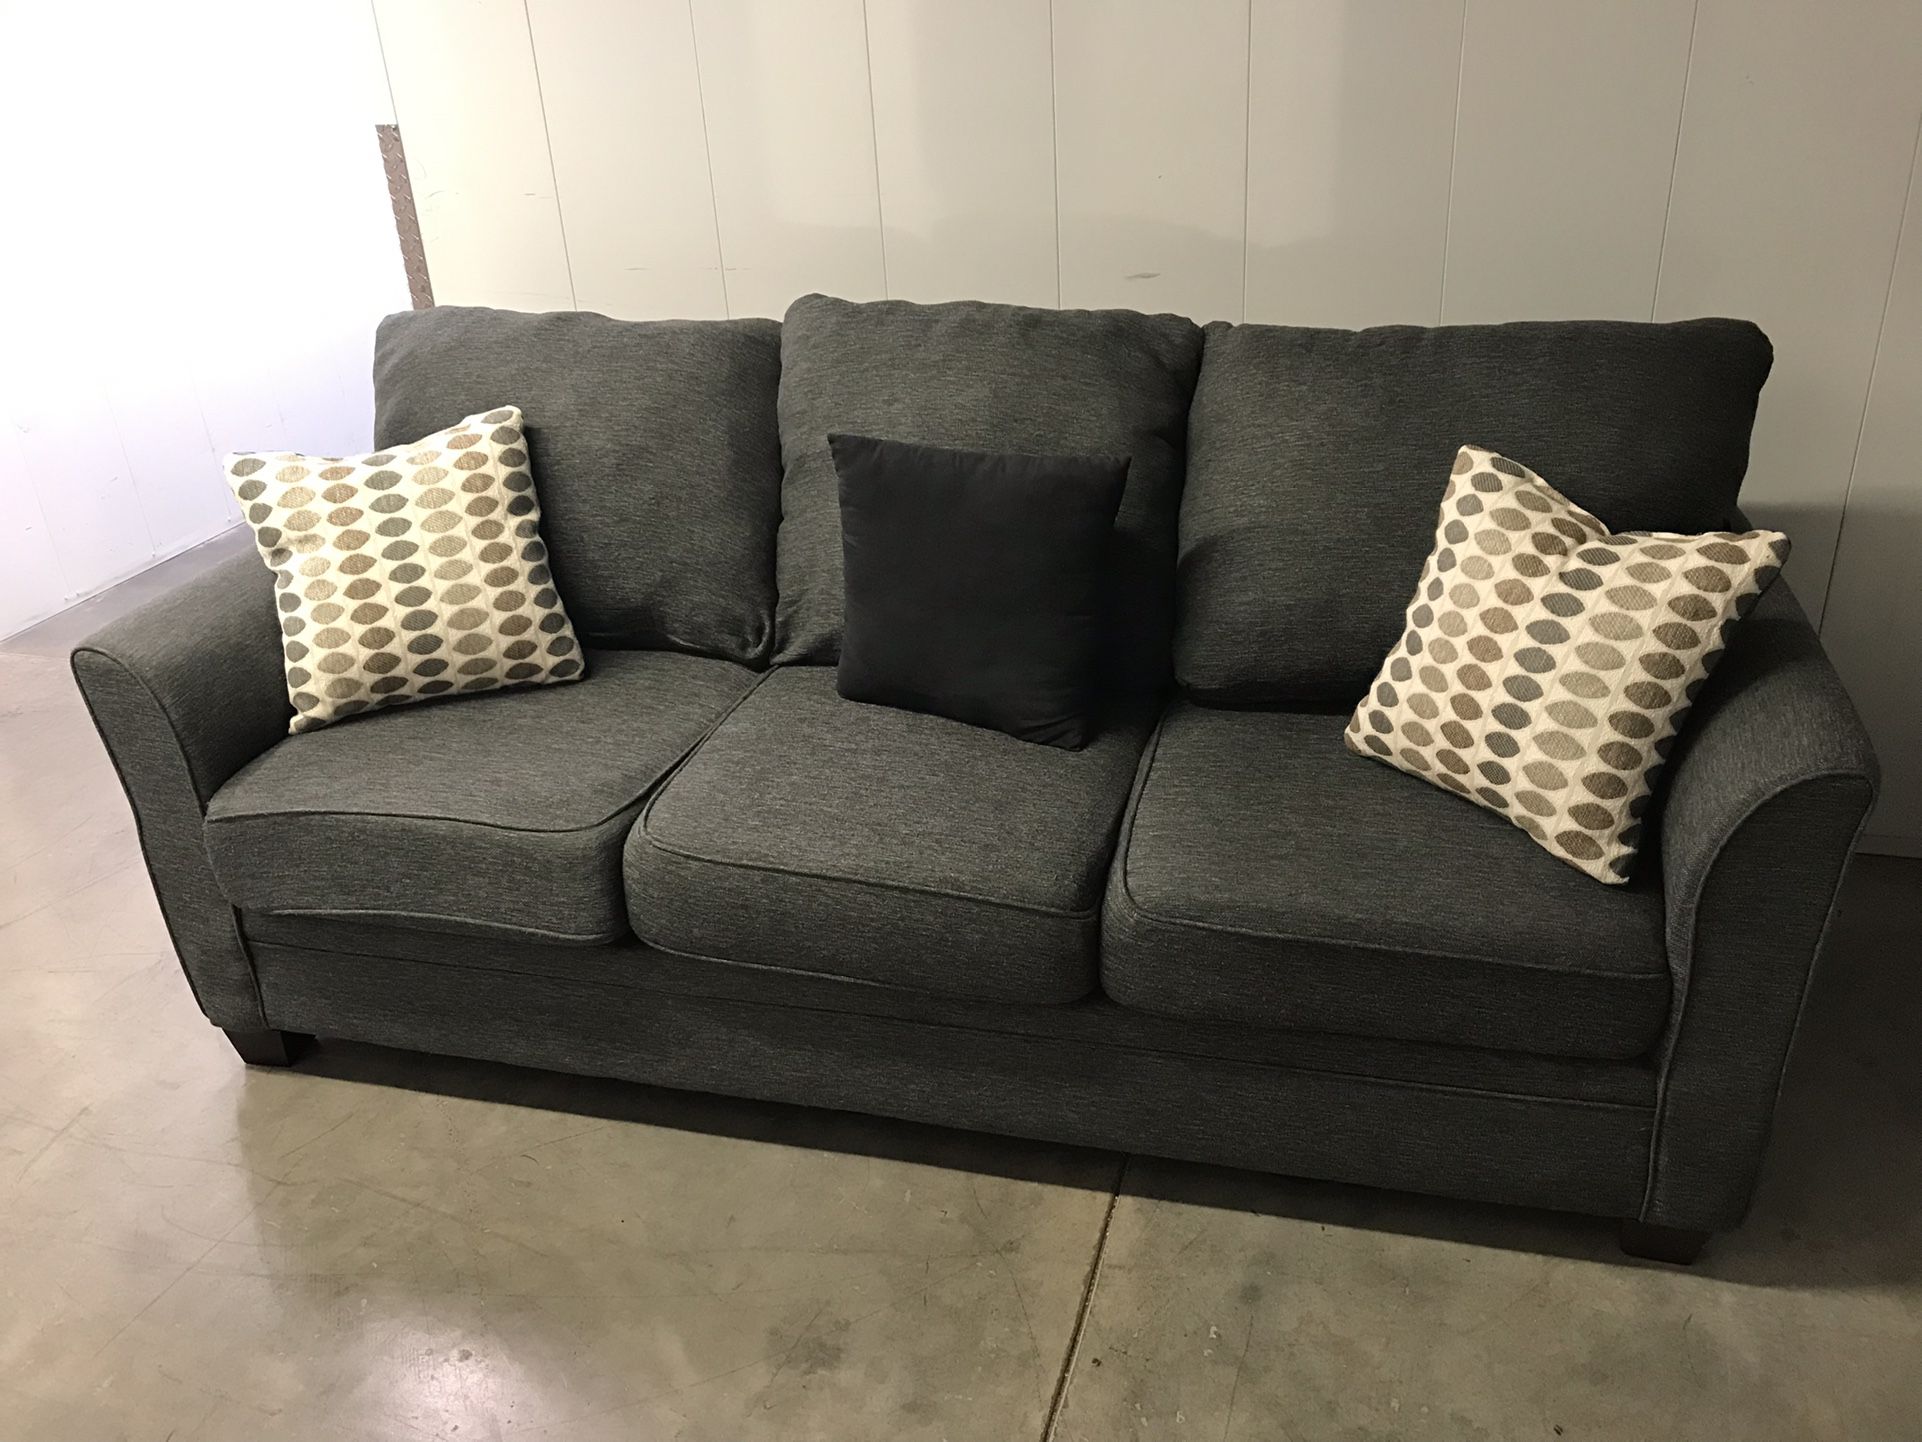 Gray Couch & pillows